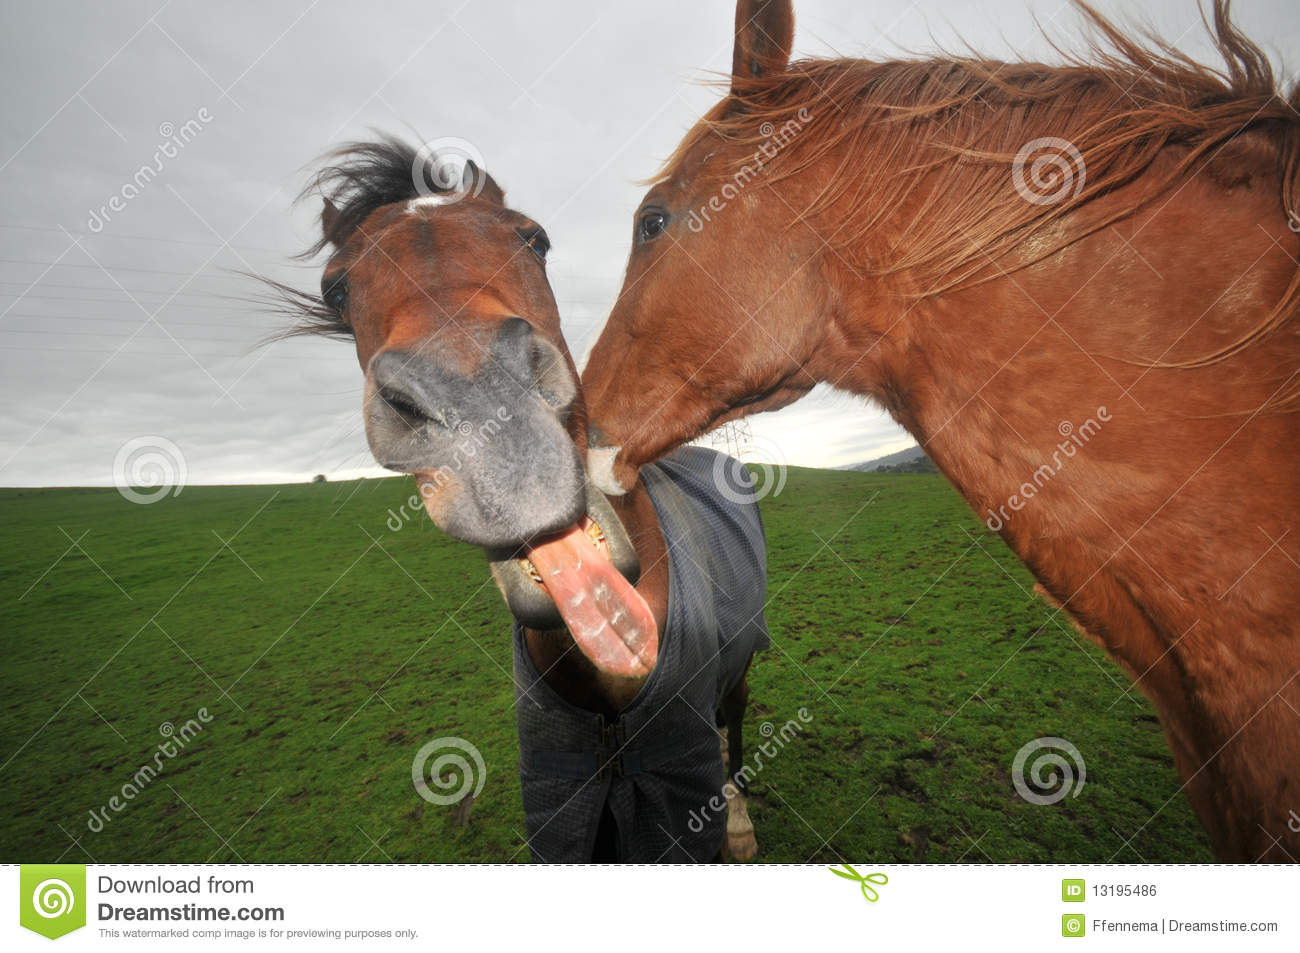 Two Horses Kissing With Mouth Open Royalty Free Stock Image   Image    